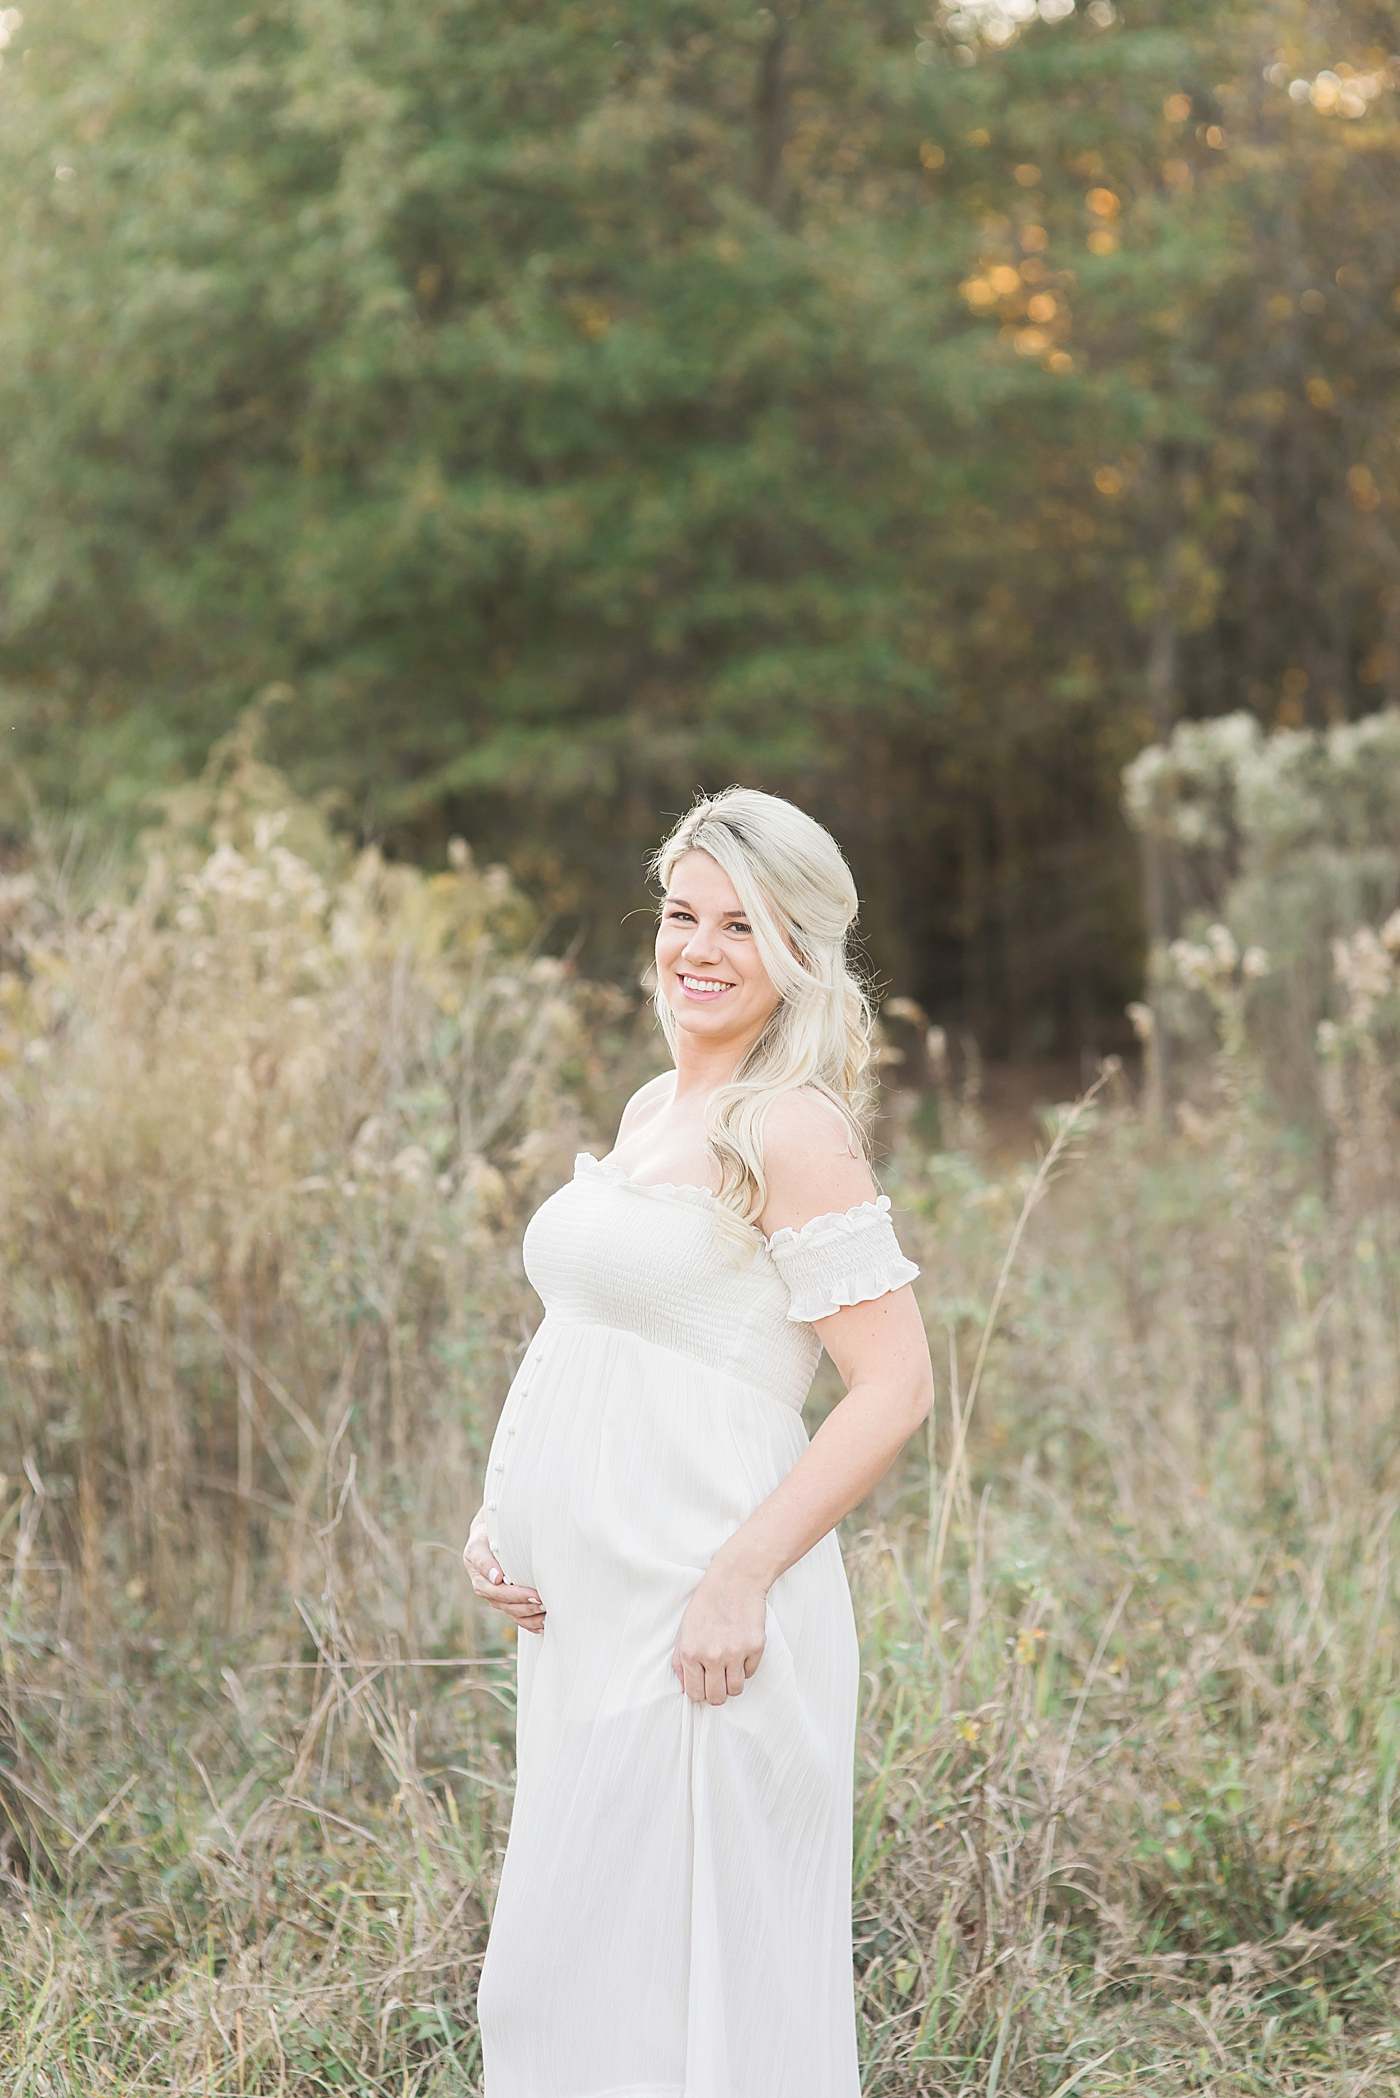 Expecting mother in long white dress in a field | Photo by Charlotte Maternity Photographer Anna Wisjo 